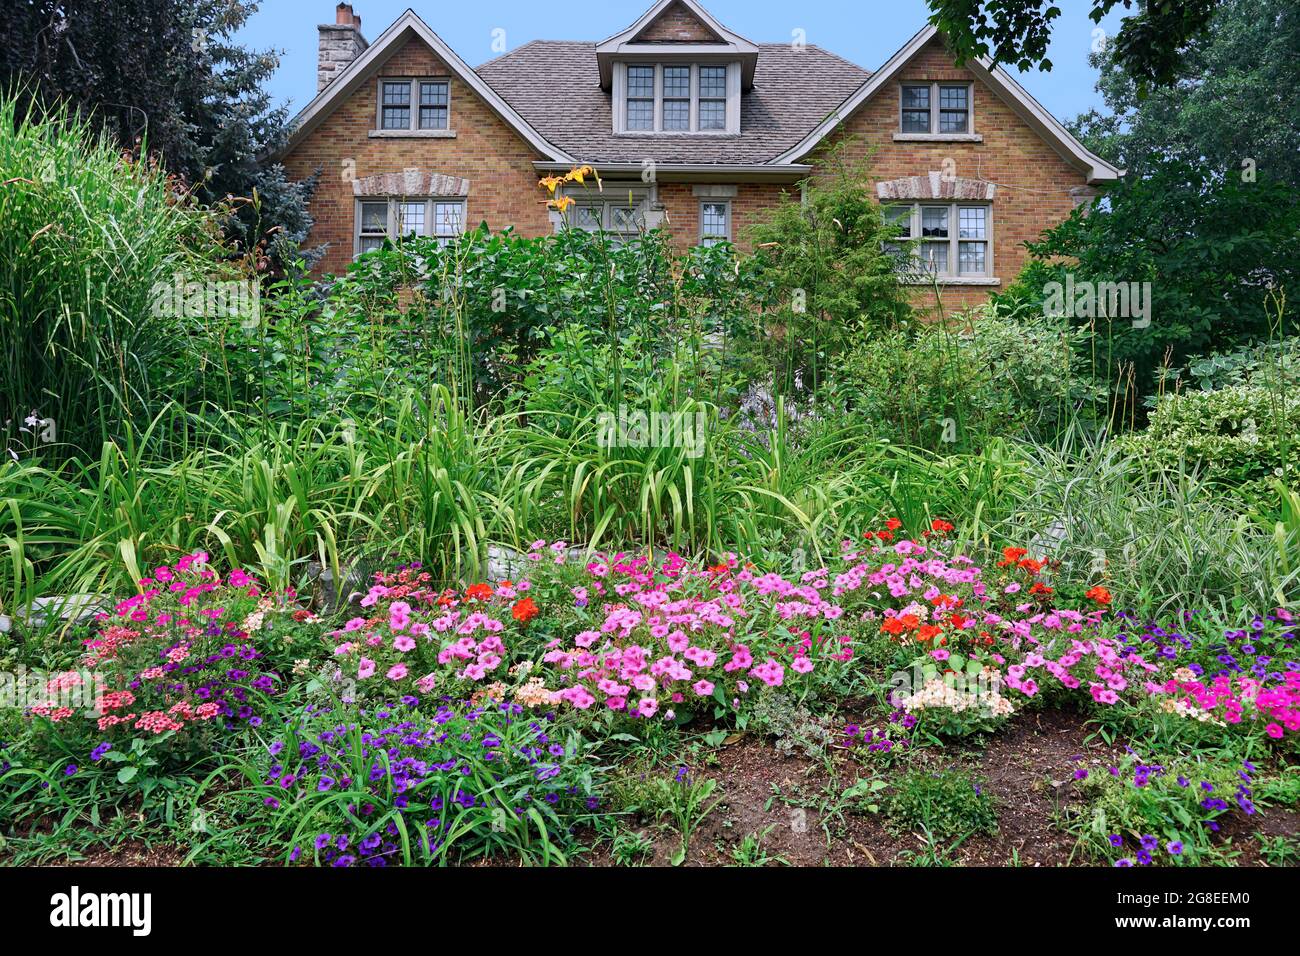 Lush home front garden with a profusion of green reeds and colorful flowers Stock Photo